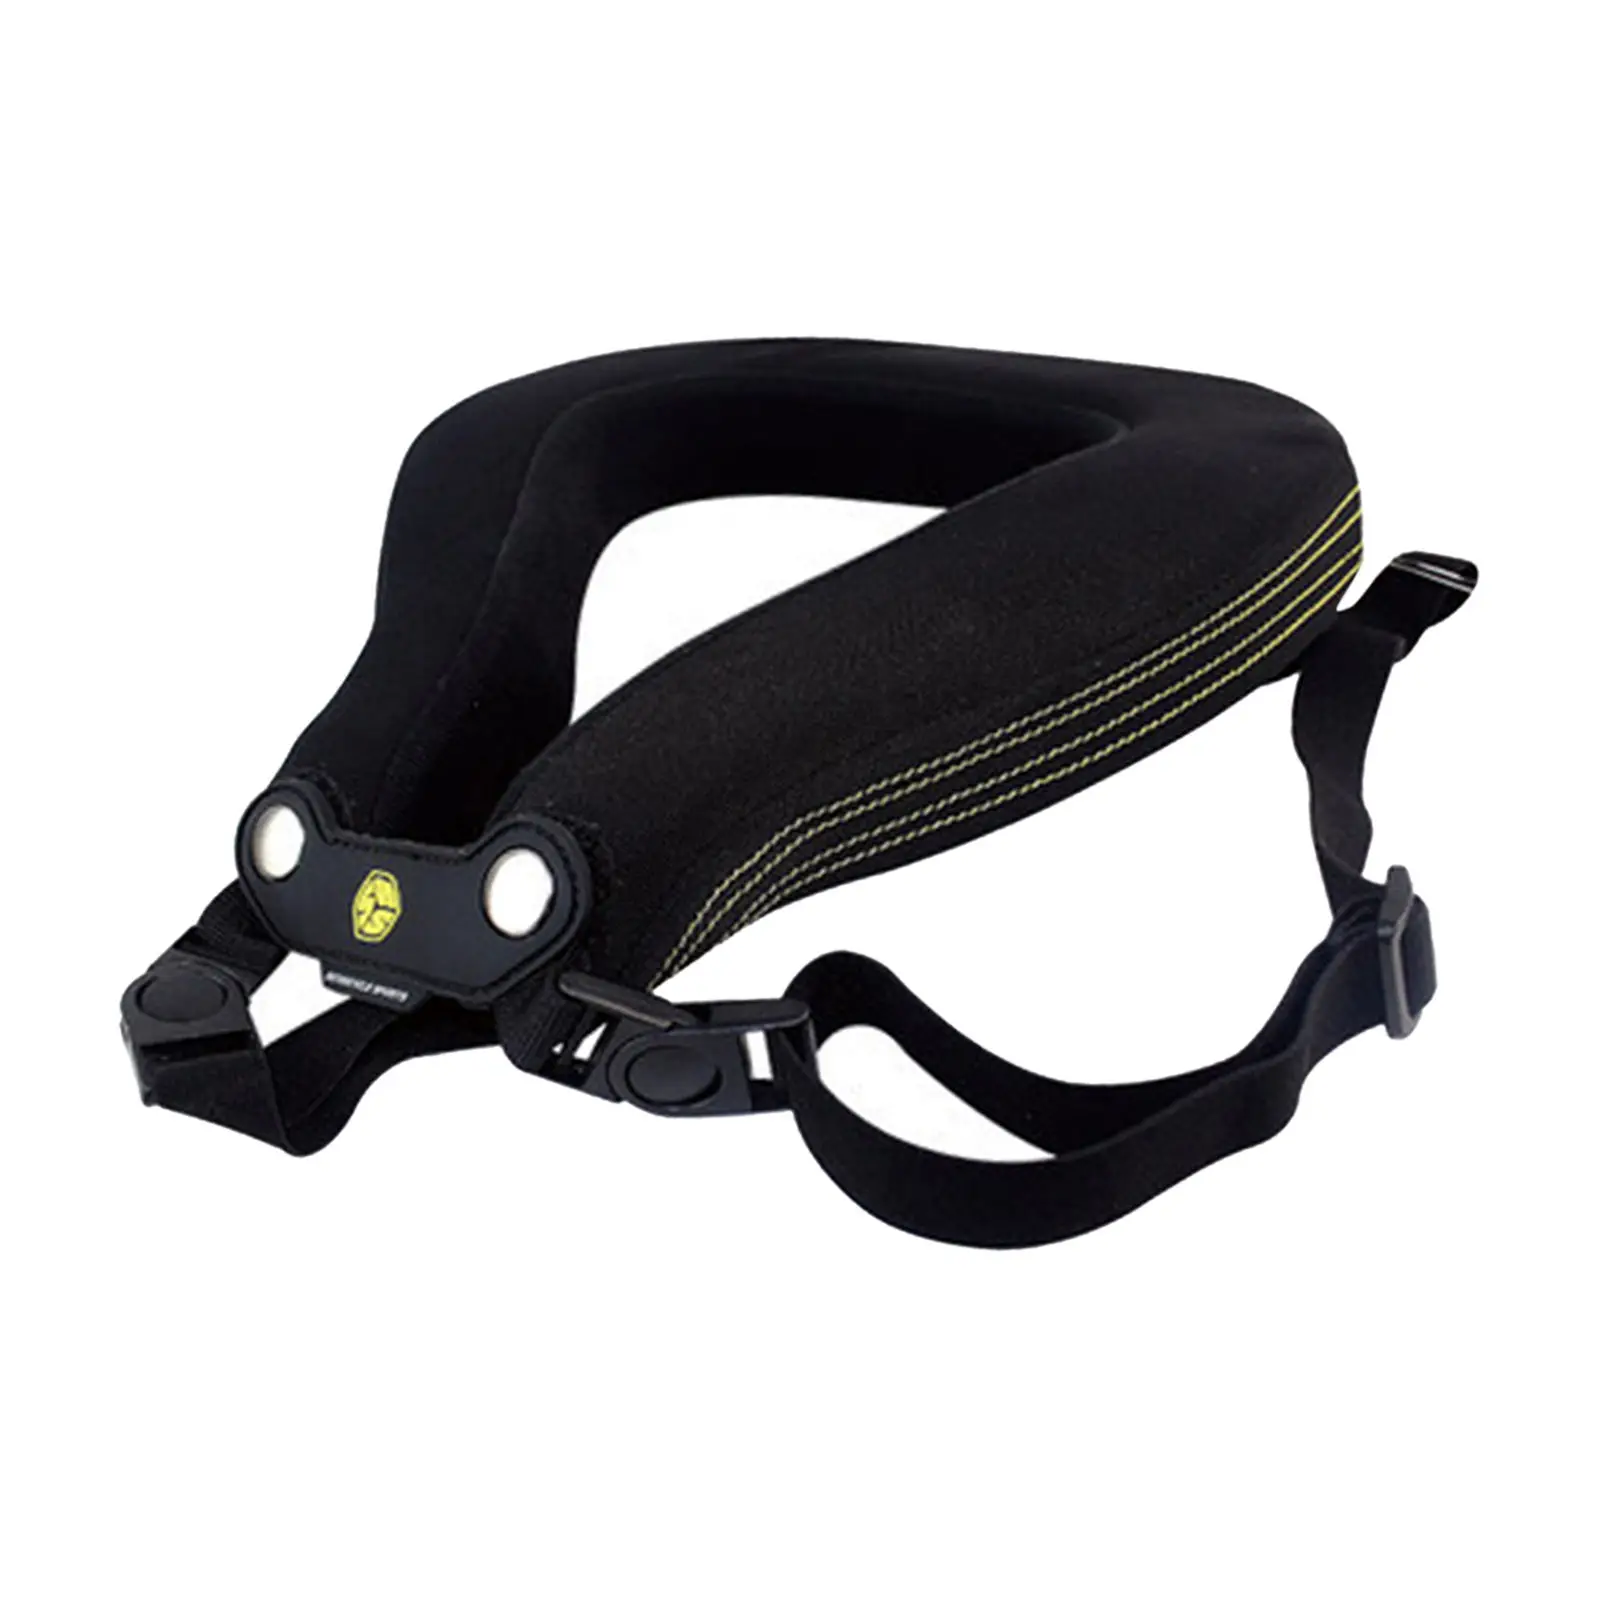 Sports Unisex-adult R2 Race Collar Gear Motorcycle  One Size